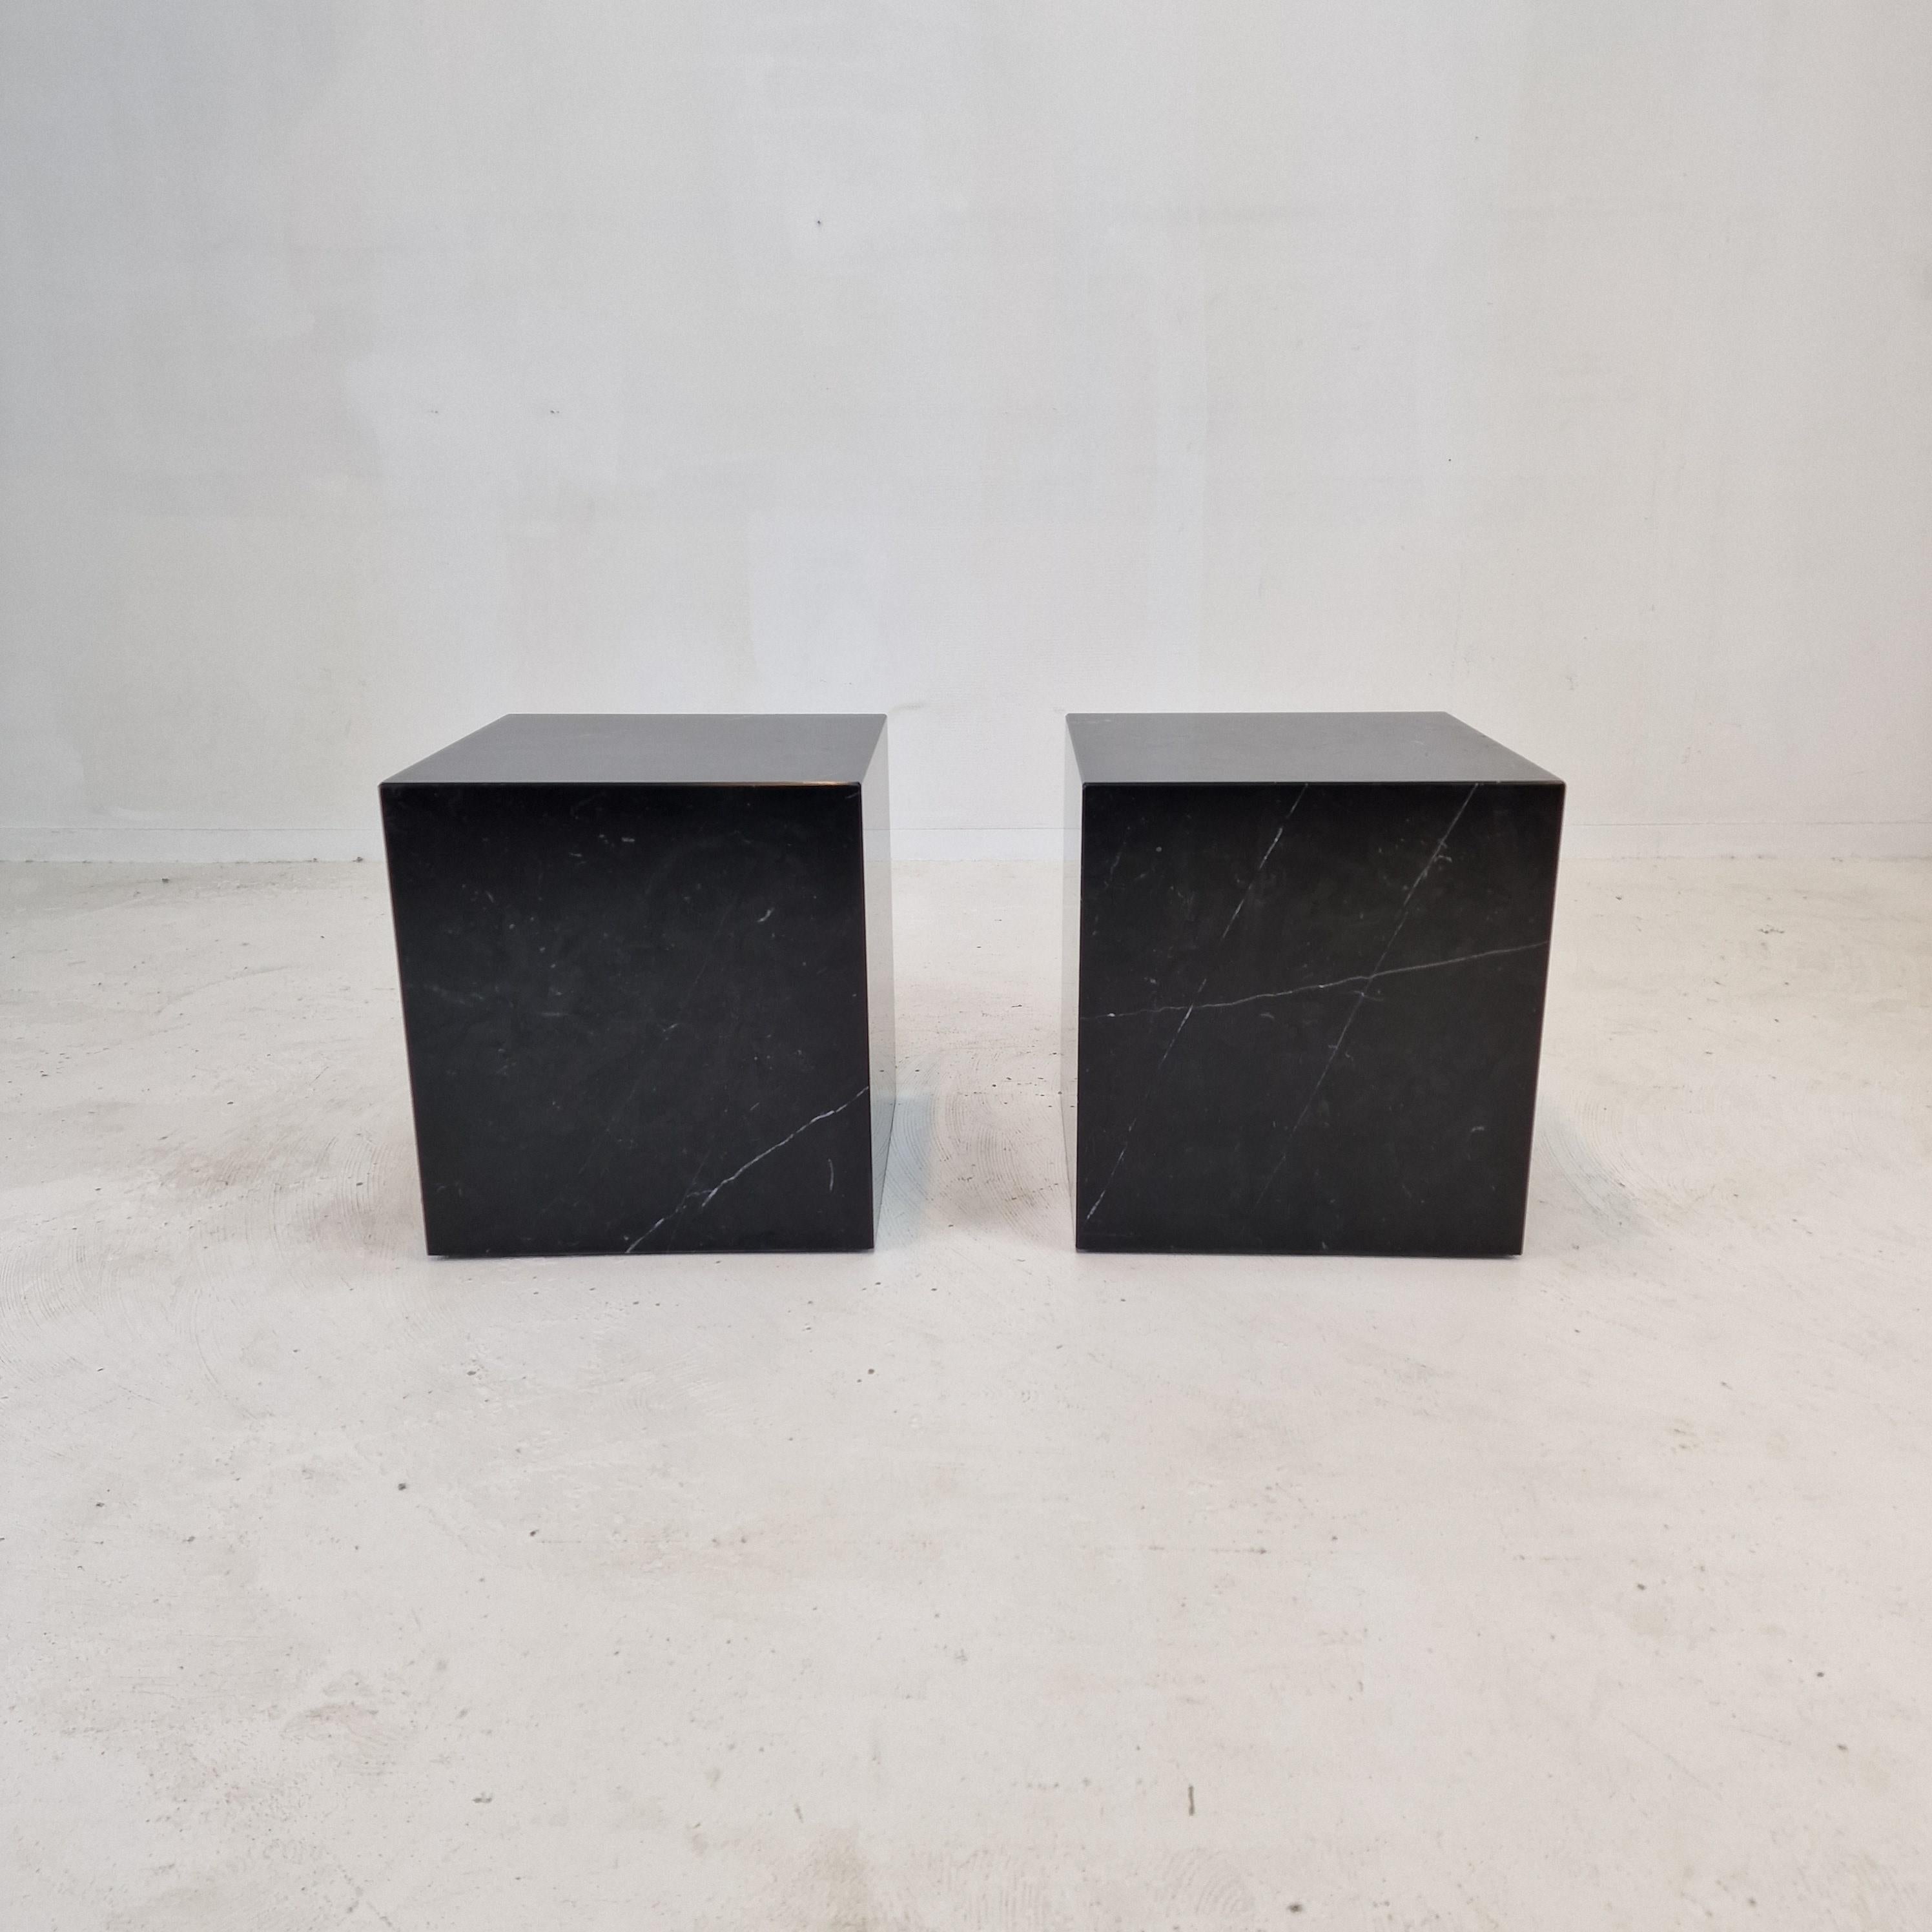 Very nice Italian side table or pedestal, fabricated in the early 80's.
It can also be used as a coffee table.

It is handcrafted out of very beautiful black marble.
Under the item there are small adjustable feet.

We work with professional packers